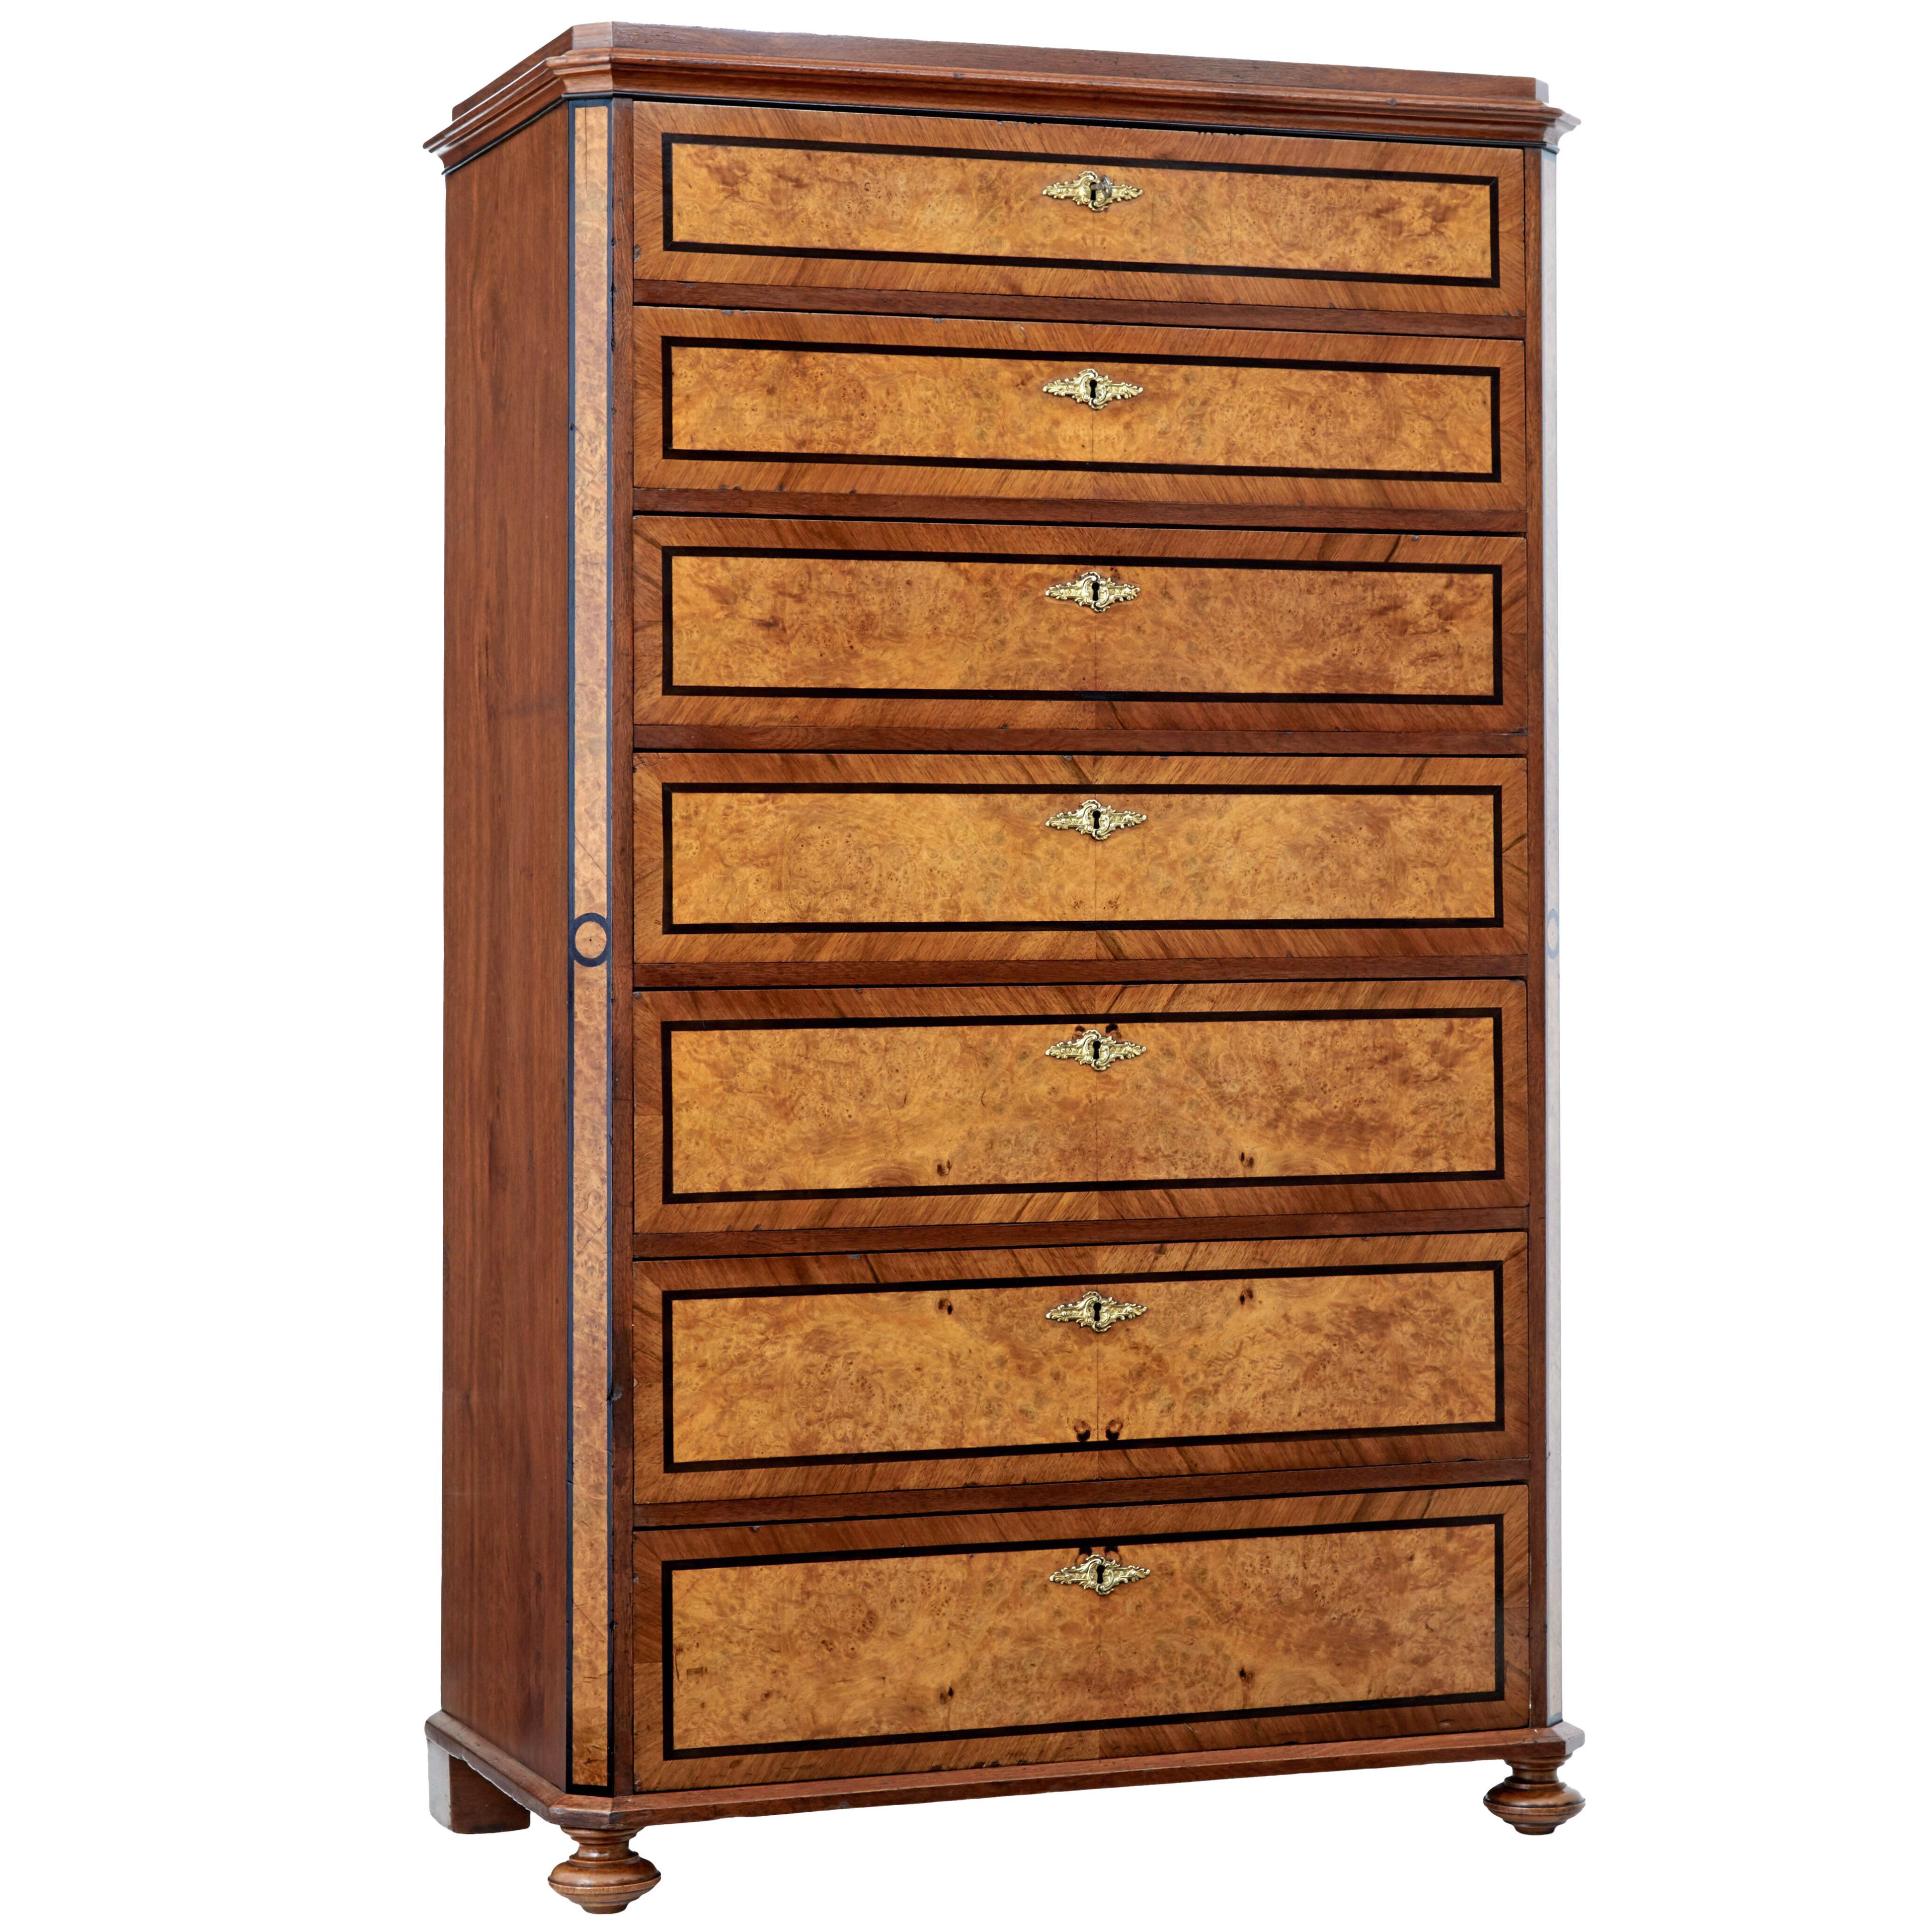 19TH CENTURY BURR WALNUT TALL CHEST OF DRAWERS